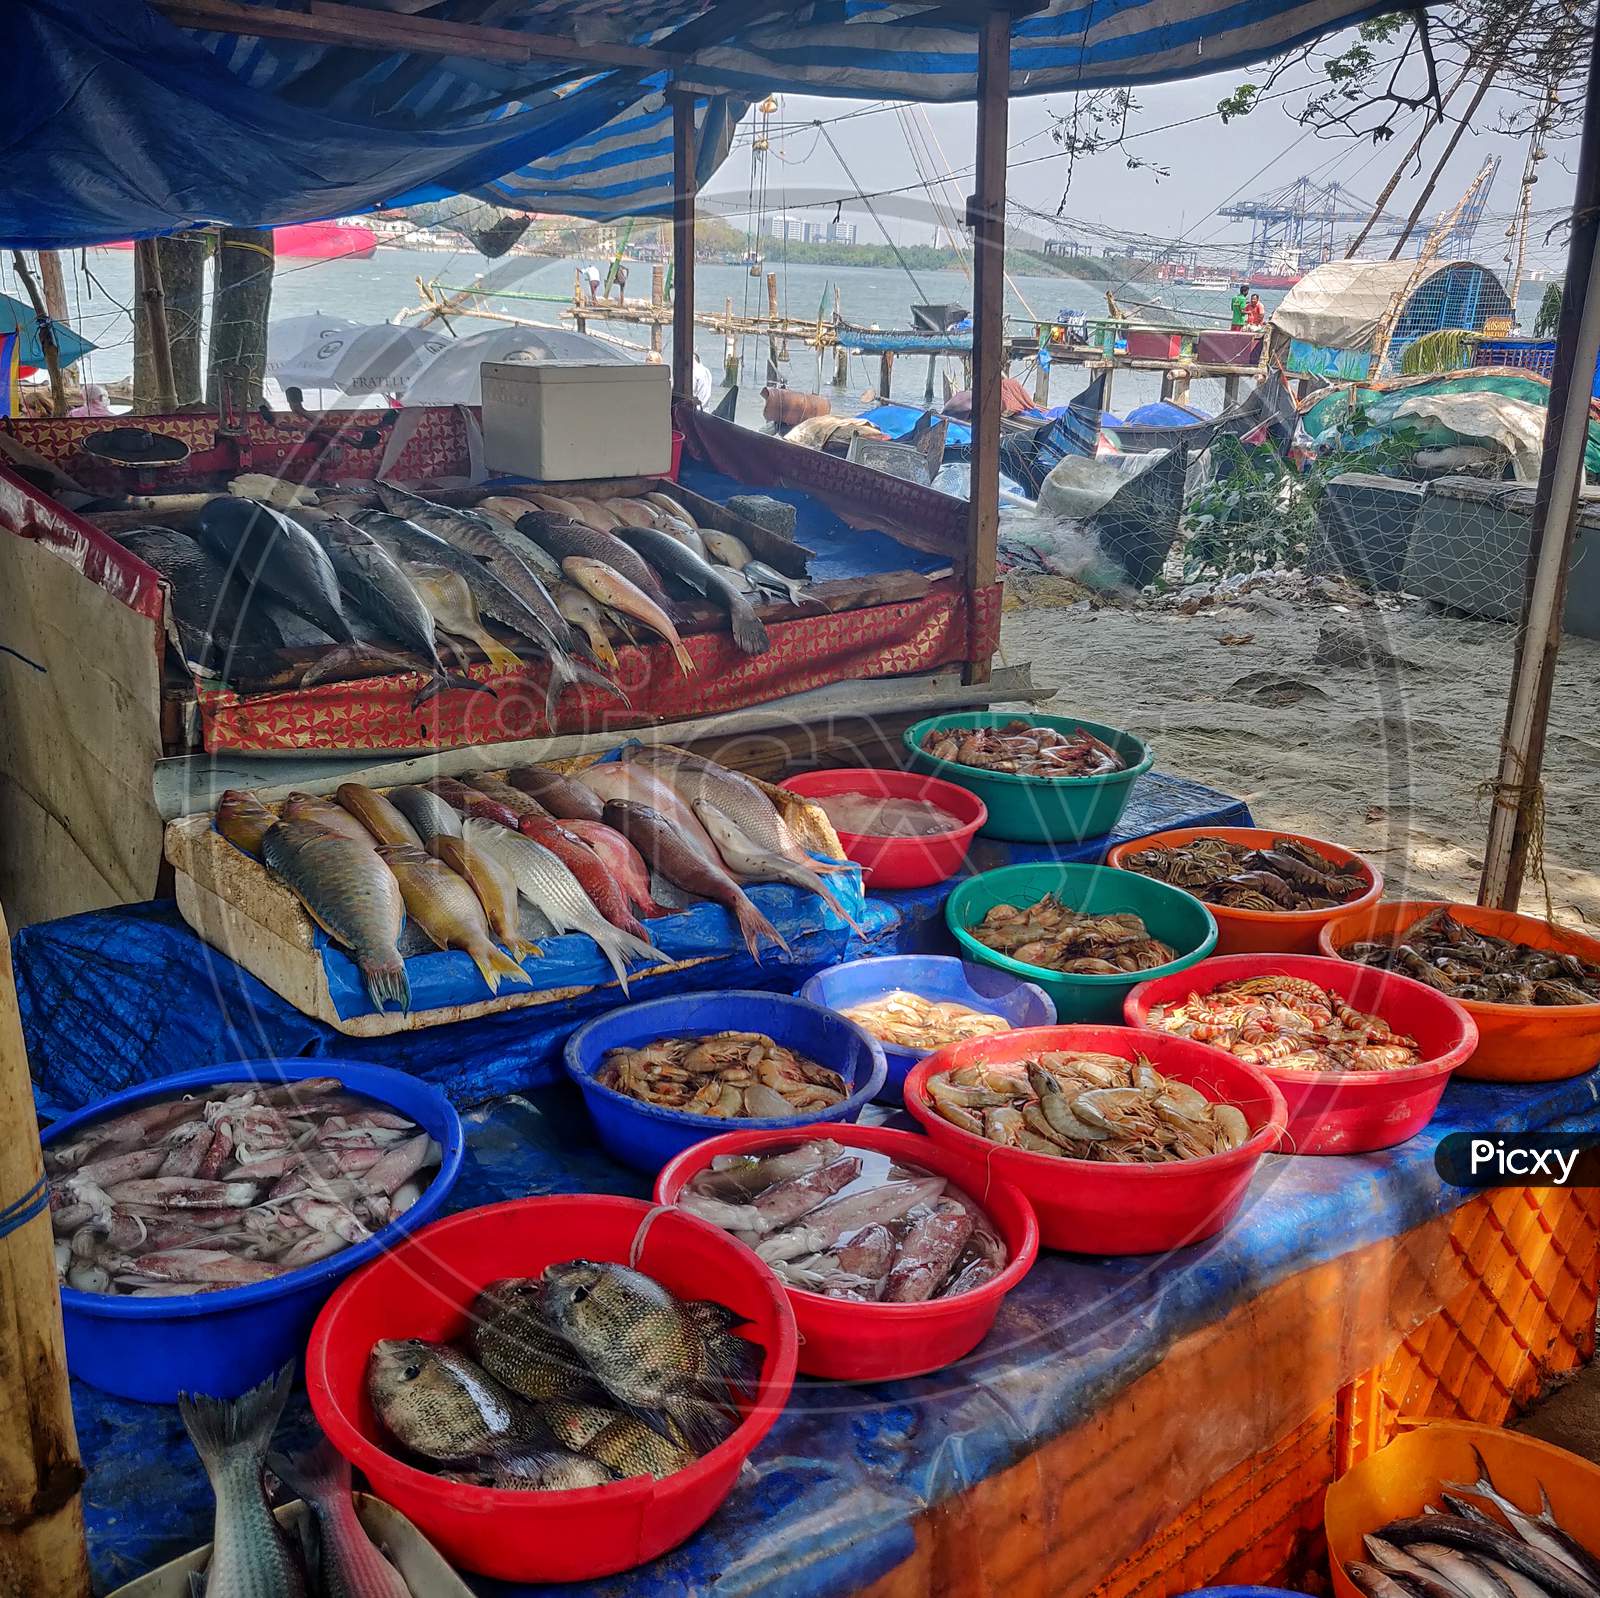 January 27, 2019- Kerala, India: An Image Of A Fish Stall In Kochi, Kerala, India. Different Verities Of Fish Are Arranged On Baskets, Basins And Containers For Sale.